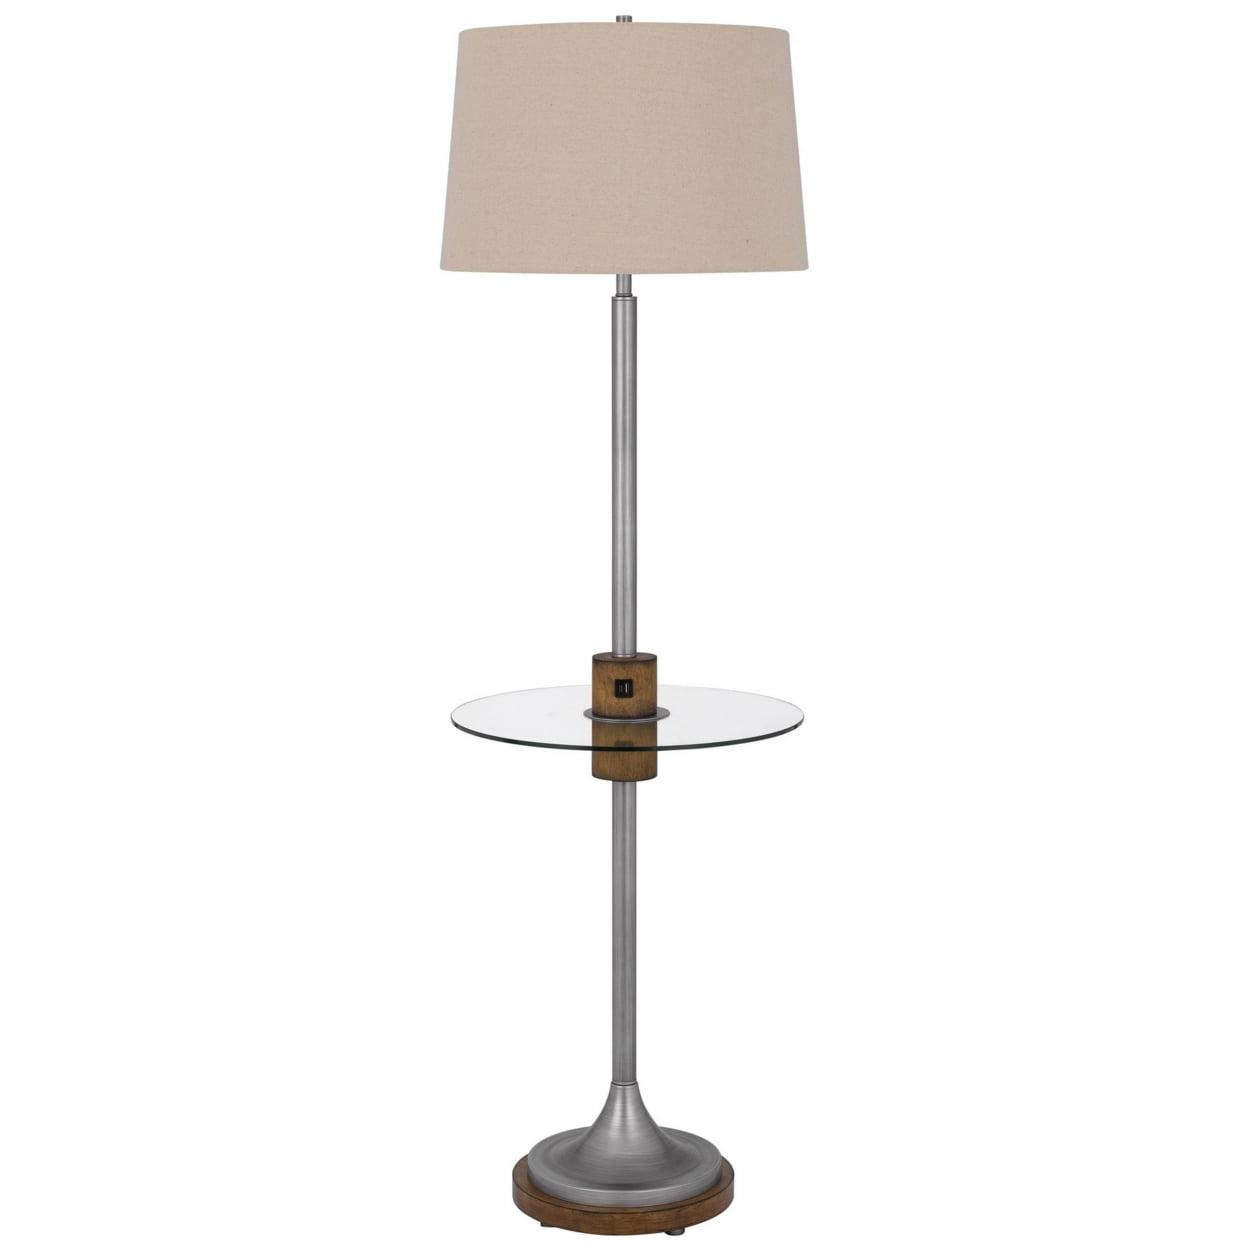 Elegant Antique Silver 61" Floor Lamp with Glass Tray & USB Port